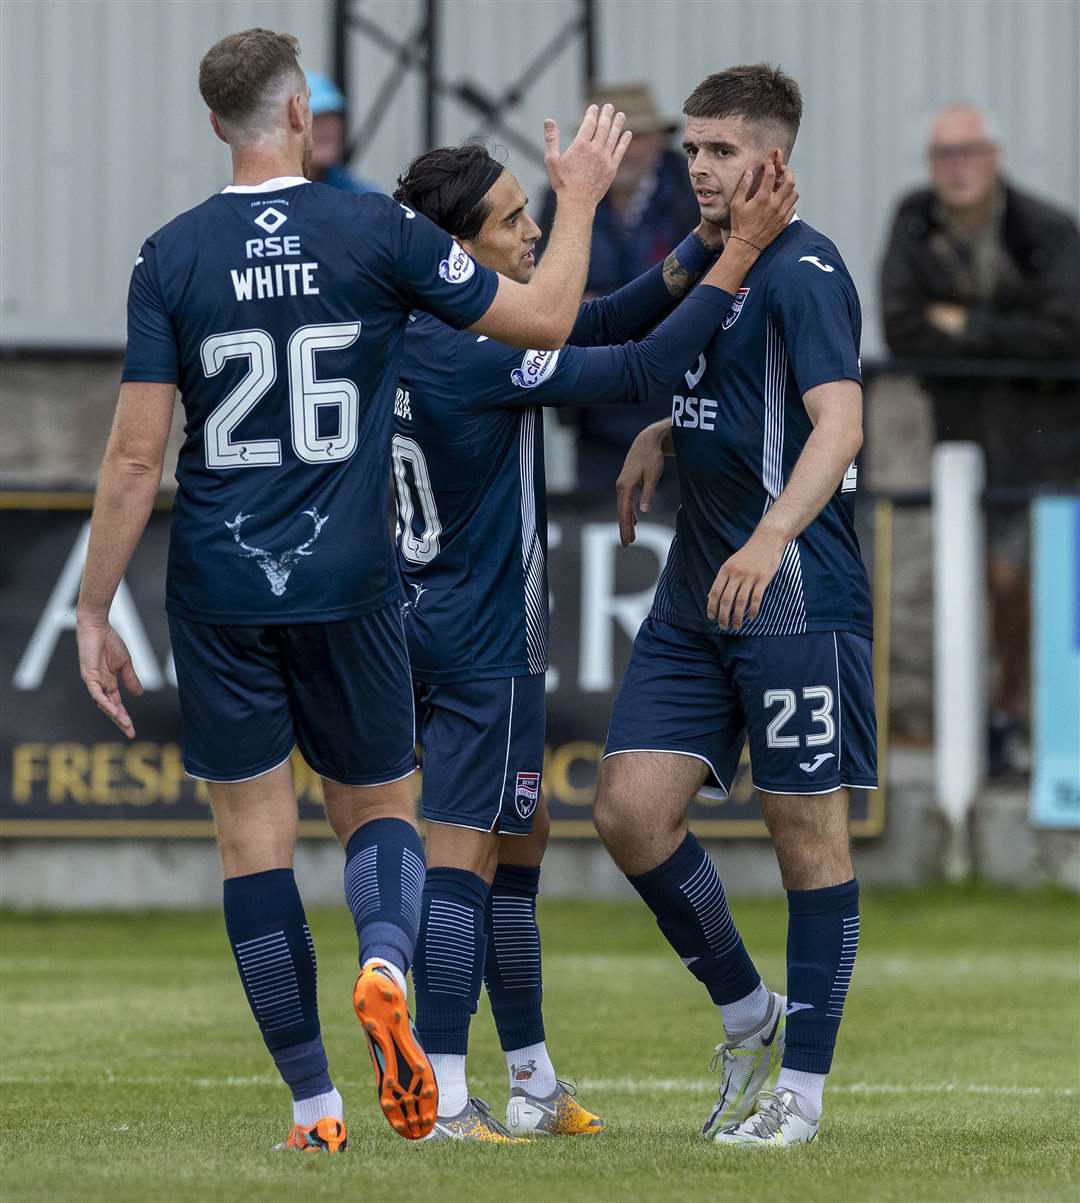 Matthew Wright scored a hat-trick for County against Nairn in pre-season before joining Elgin on loan. Picture: Ken Macpherson